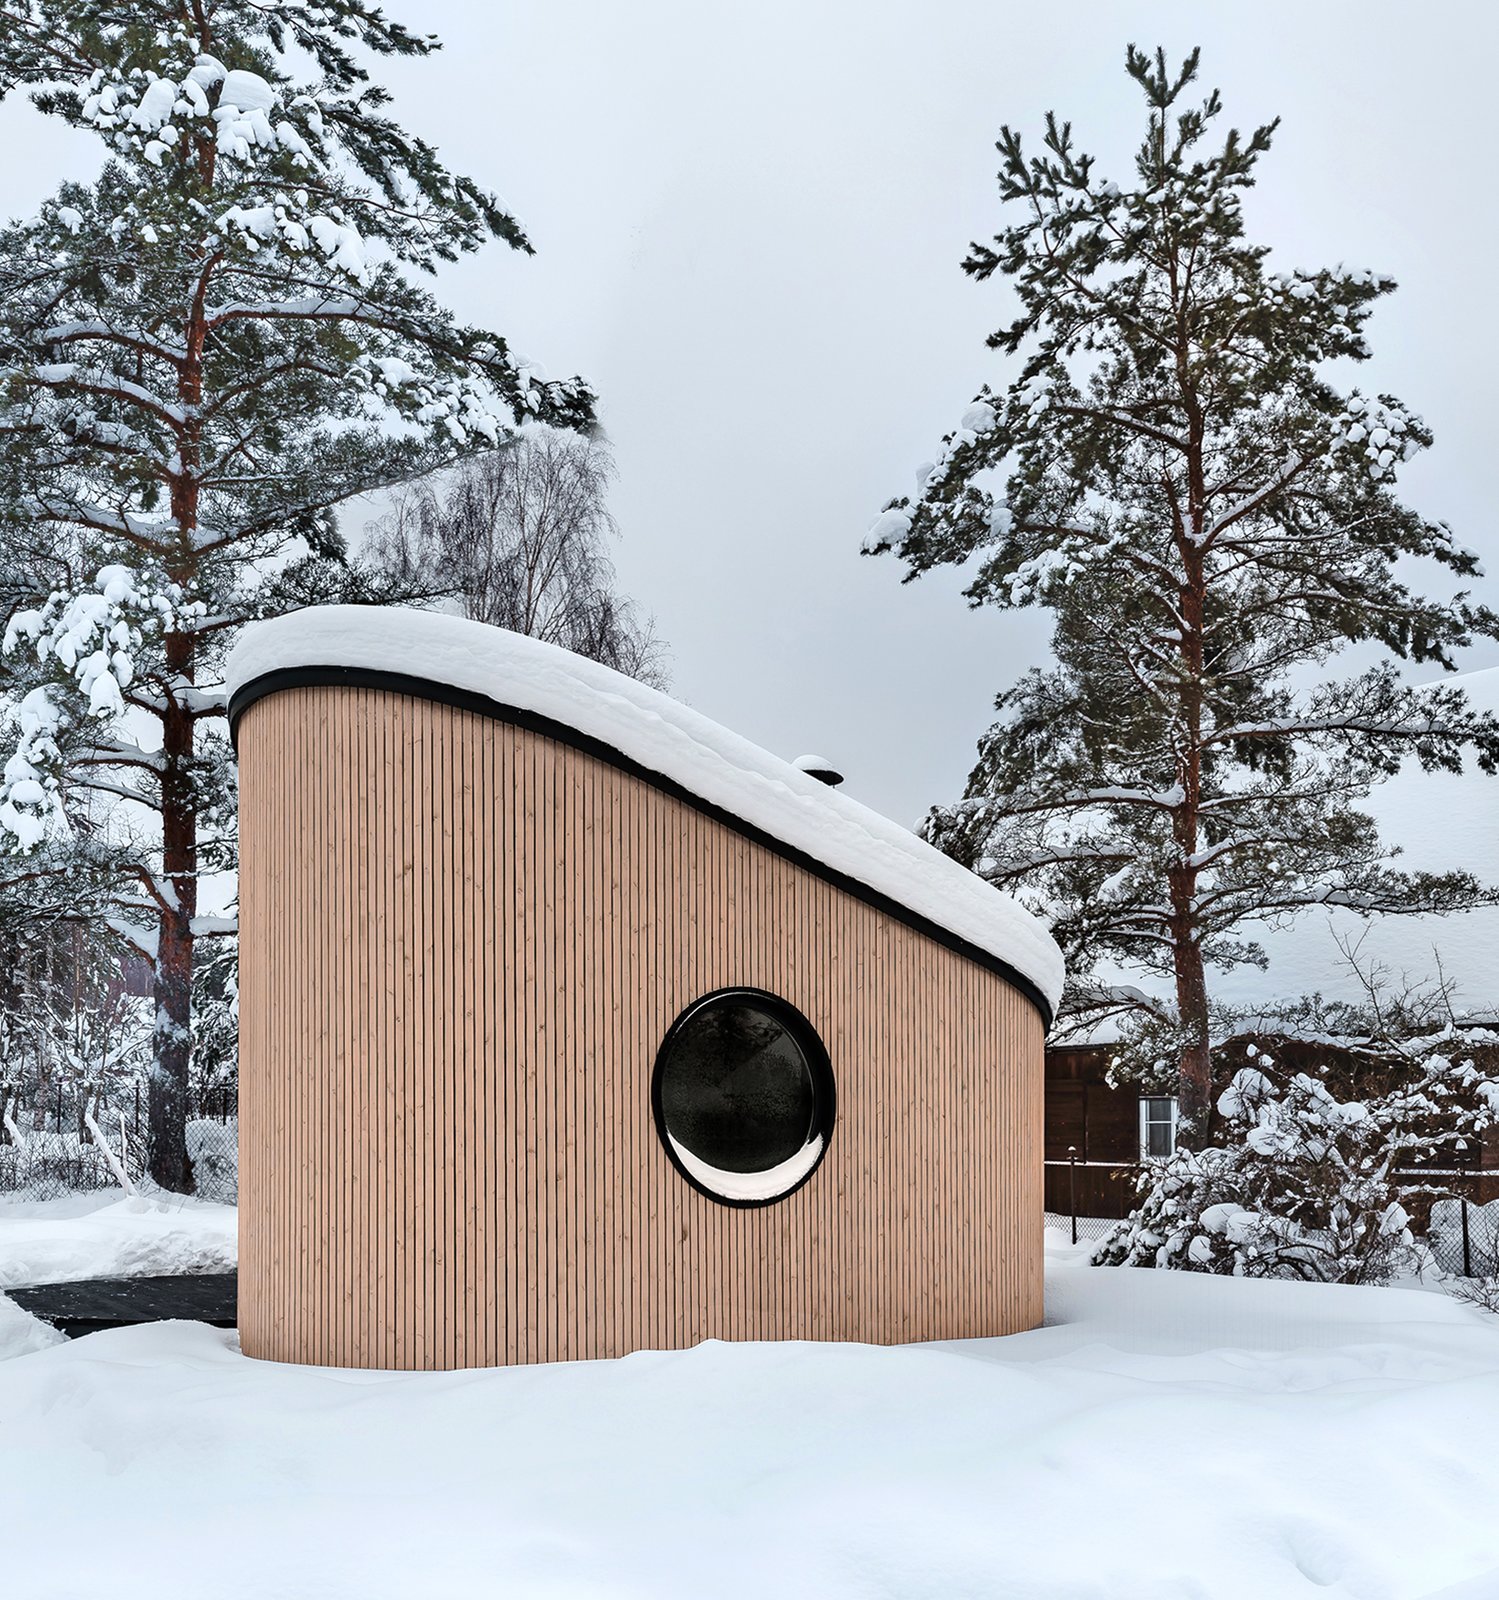 A Modern Tiny House Reinvents the Finnish Barbecue Hut